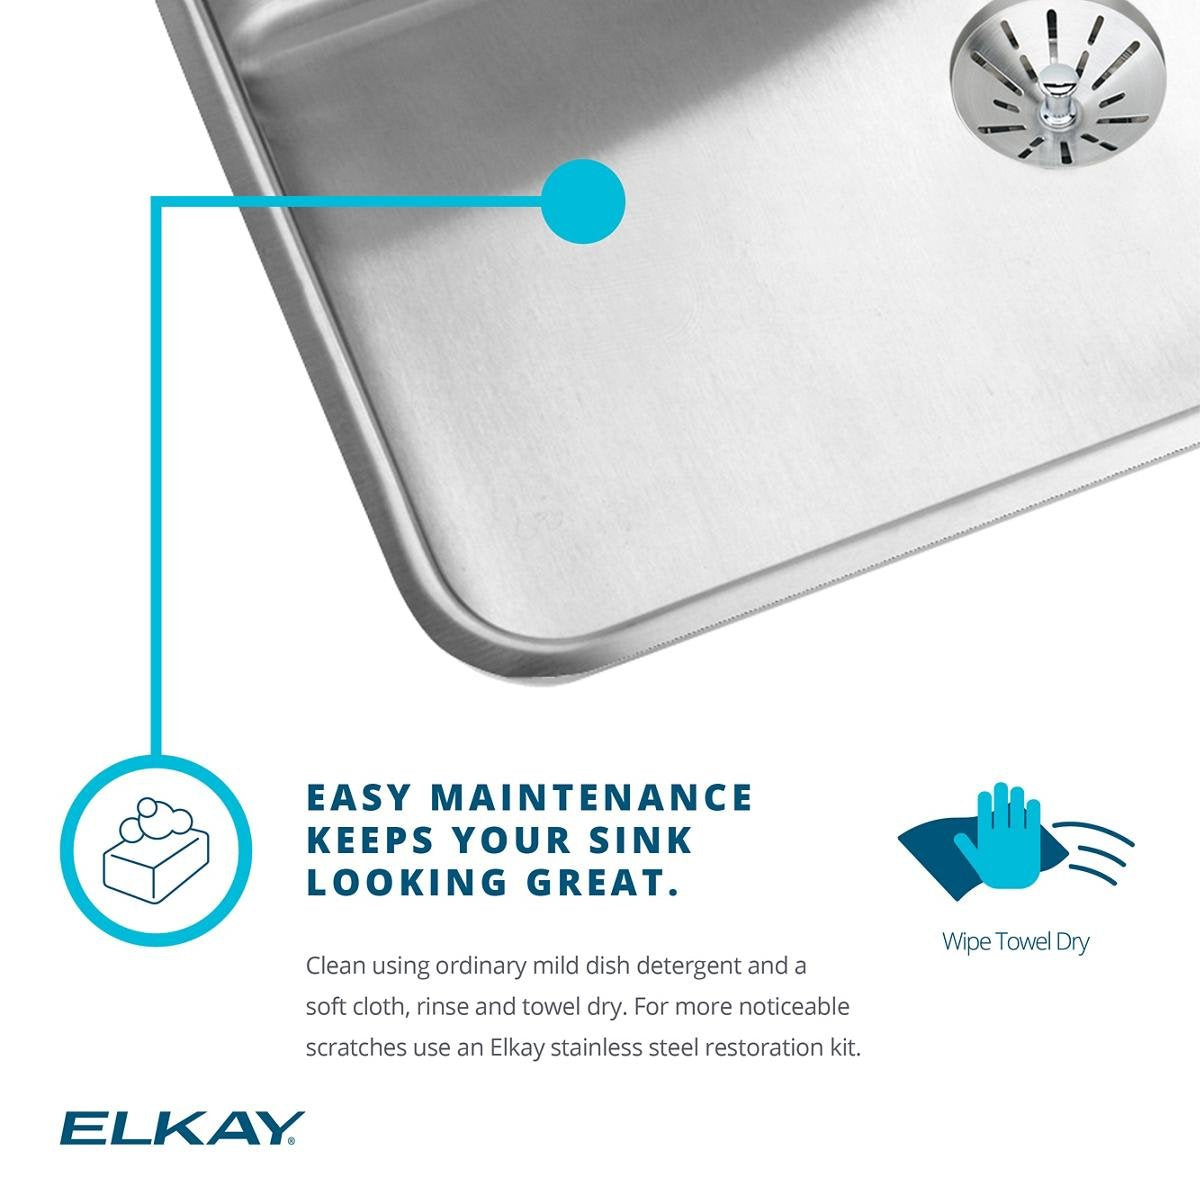 Elkay LR15171 Lustertone Stainless Steel Single Bowl Top Mount Bar Sink, 7.63 x 17.50 x 15.00 inches, Chrome